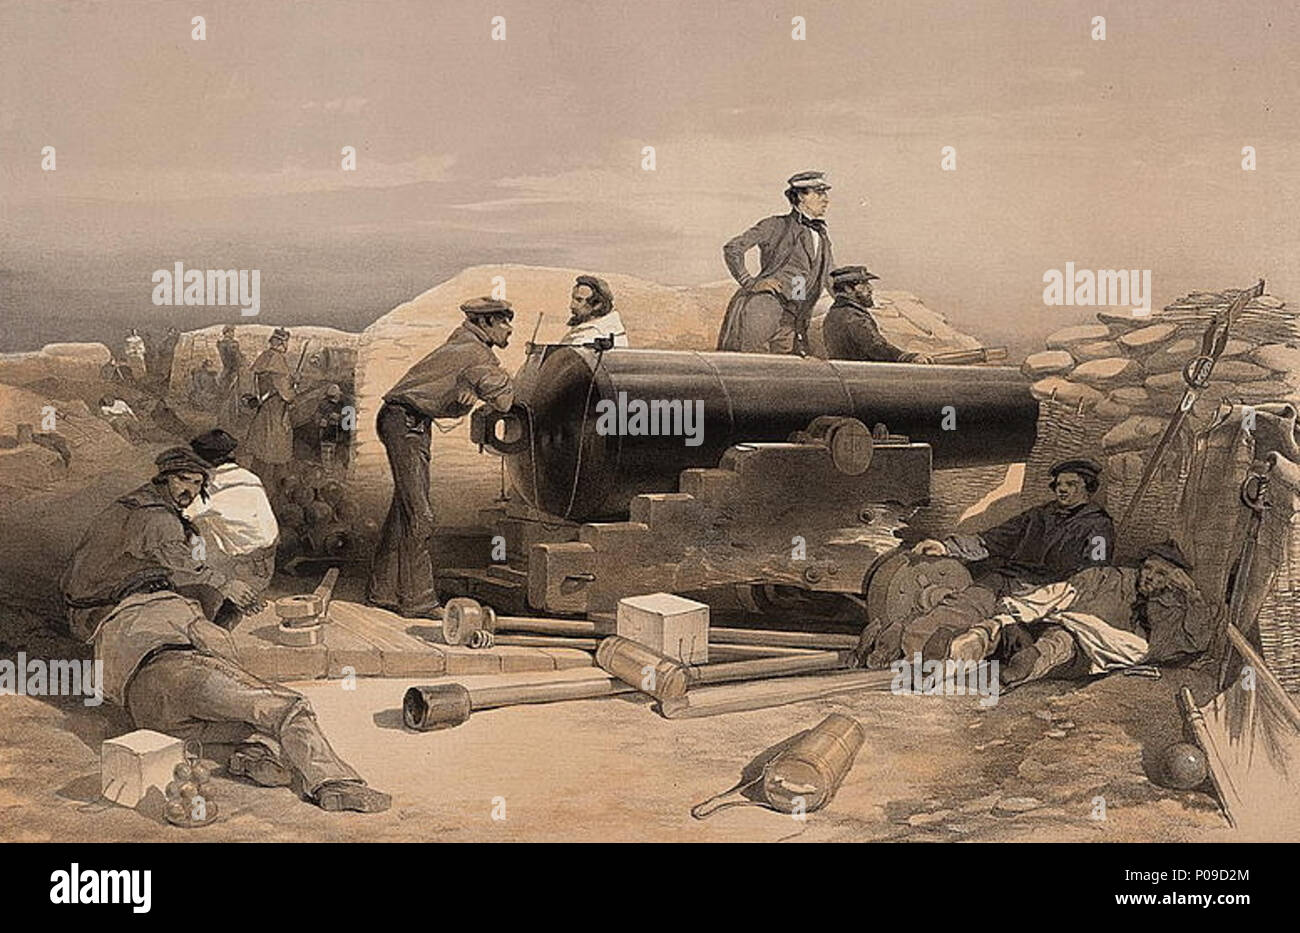 .  English: Print shows a large Lancaster cannon in a British artillery battery.  .  English: A quiet day in the diamond battery - portrait of a Lancaster 68 pounder, 15th Decr. 1854 . [London] : Published by Paul & Dominic Colnaghi & Co., 13 & 14 Pall Mall East ; Paris : Goupil & Cie., 1855 Feby. 5th (Day & Son, lithrs. to the Queen) 3 A quiet day in the diamond battery - portrait of a Lancaster 68 pounder, 15th Decr. 1854 Stock Photo